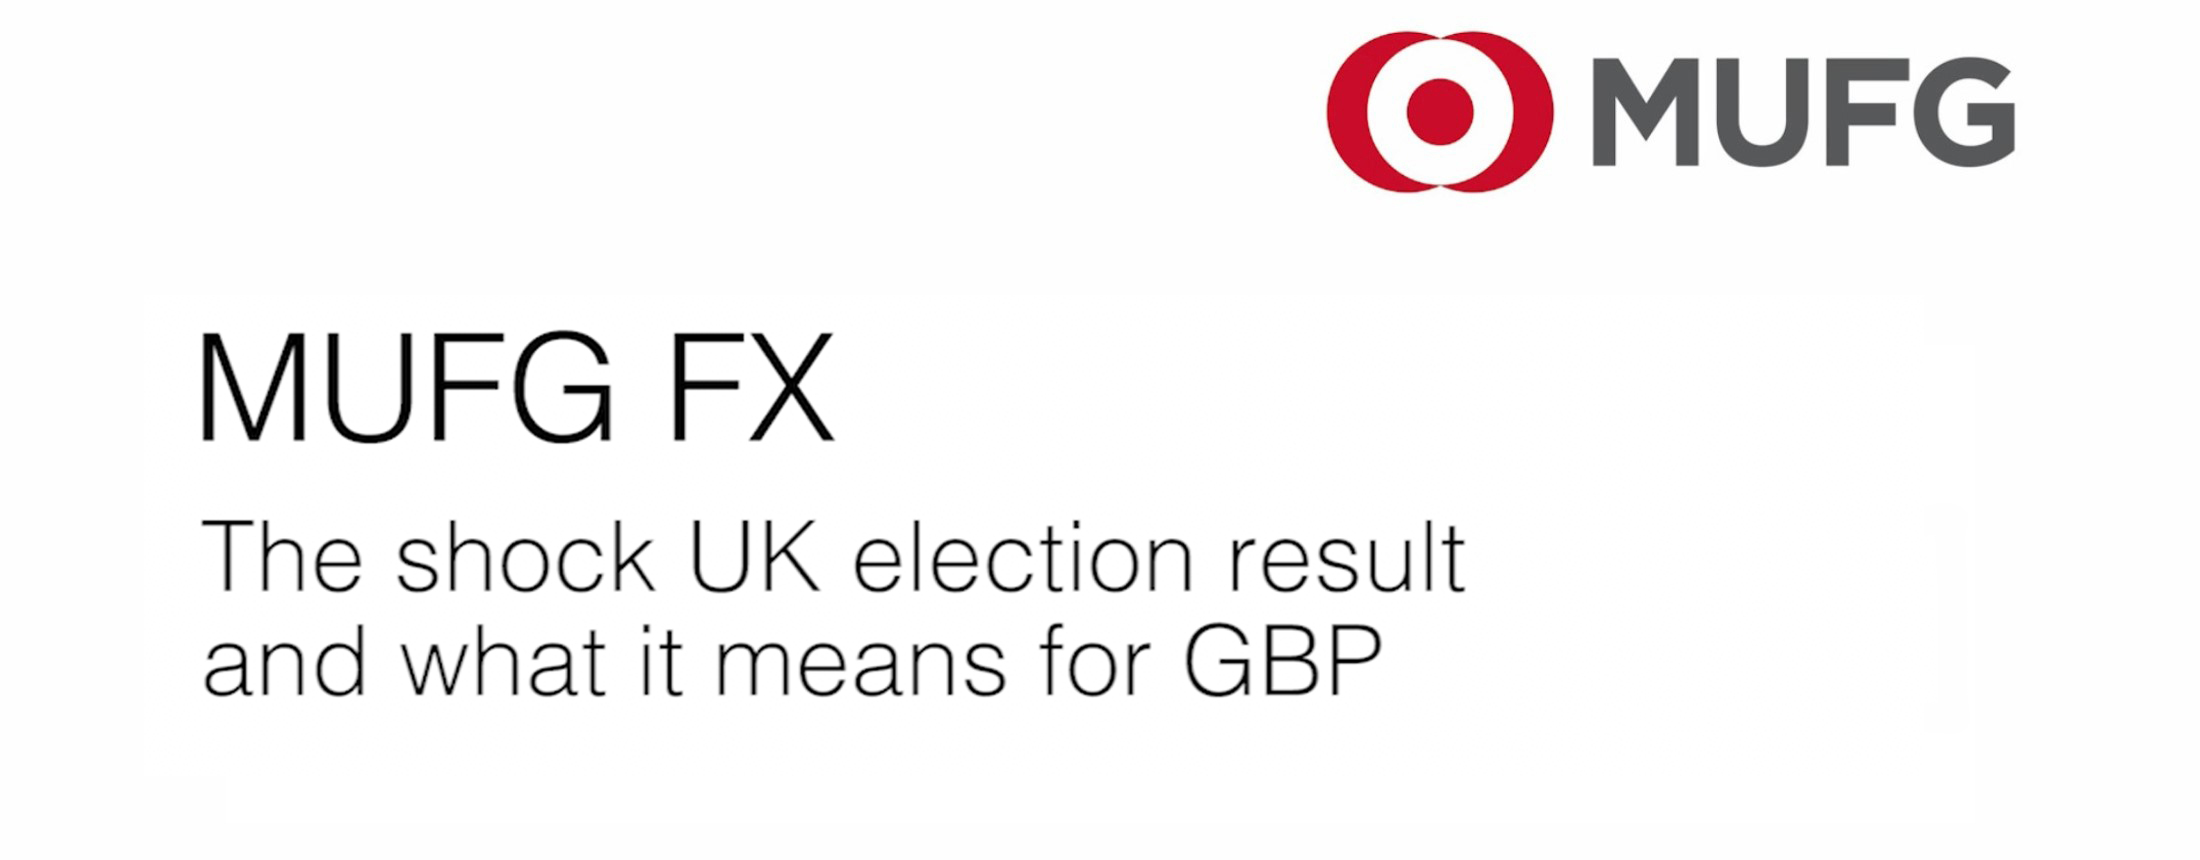 MUFG The shock Uk election results and what it means for GBP banner